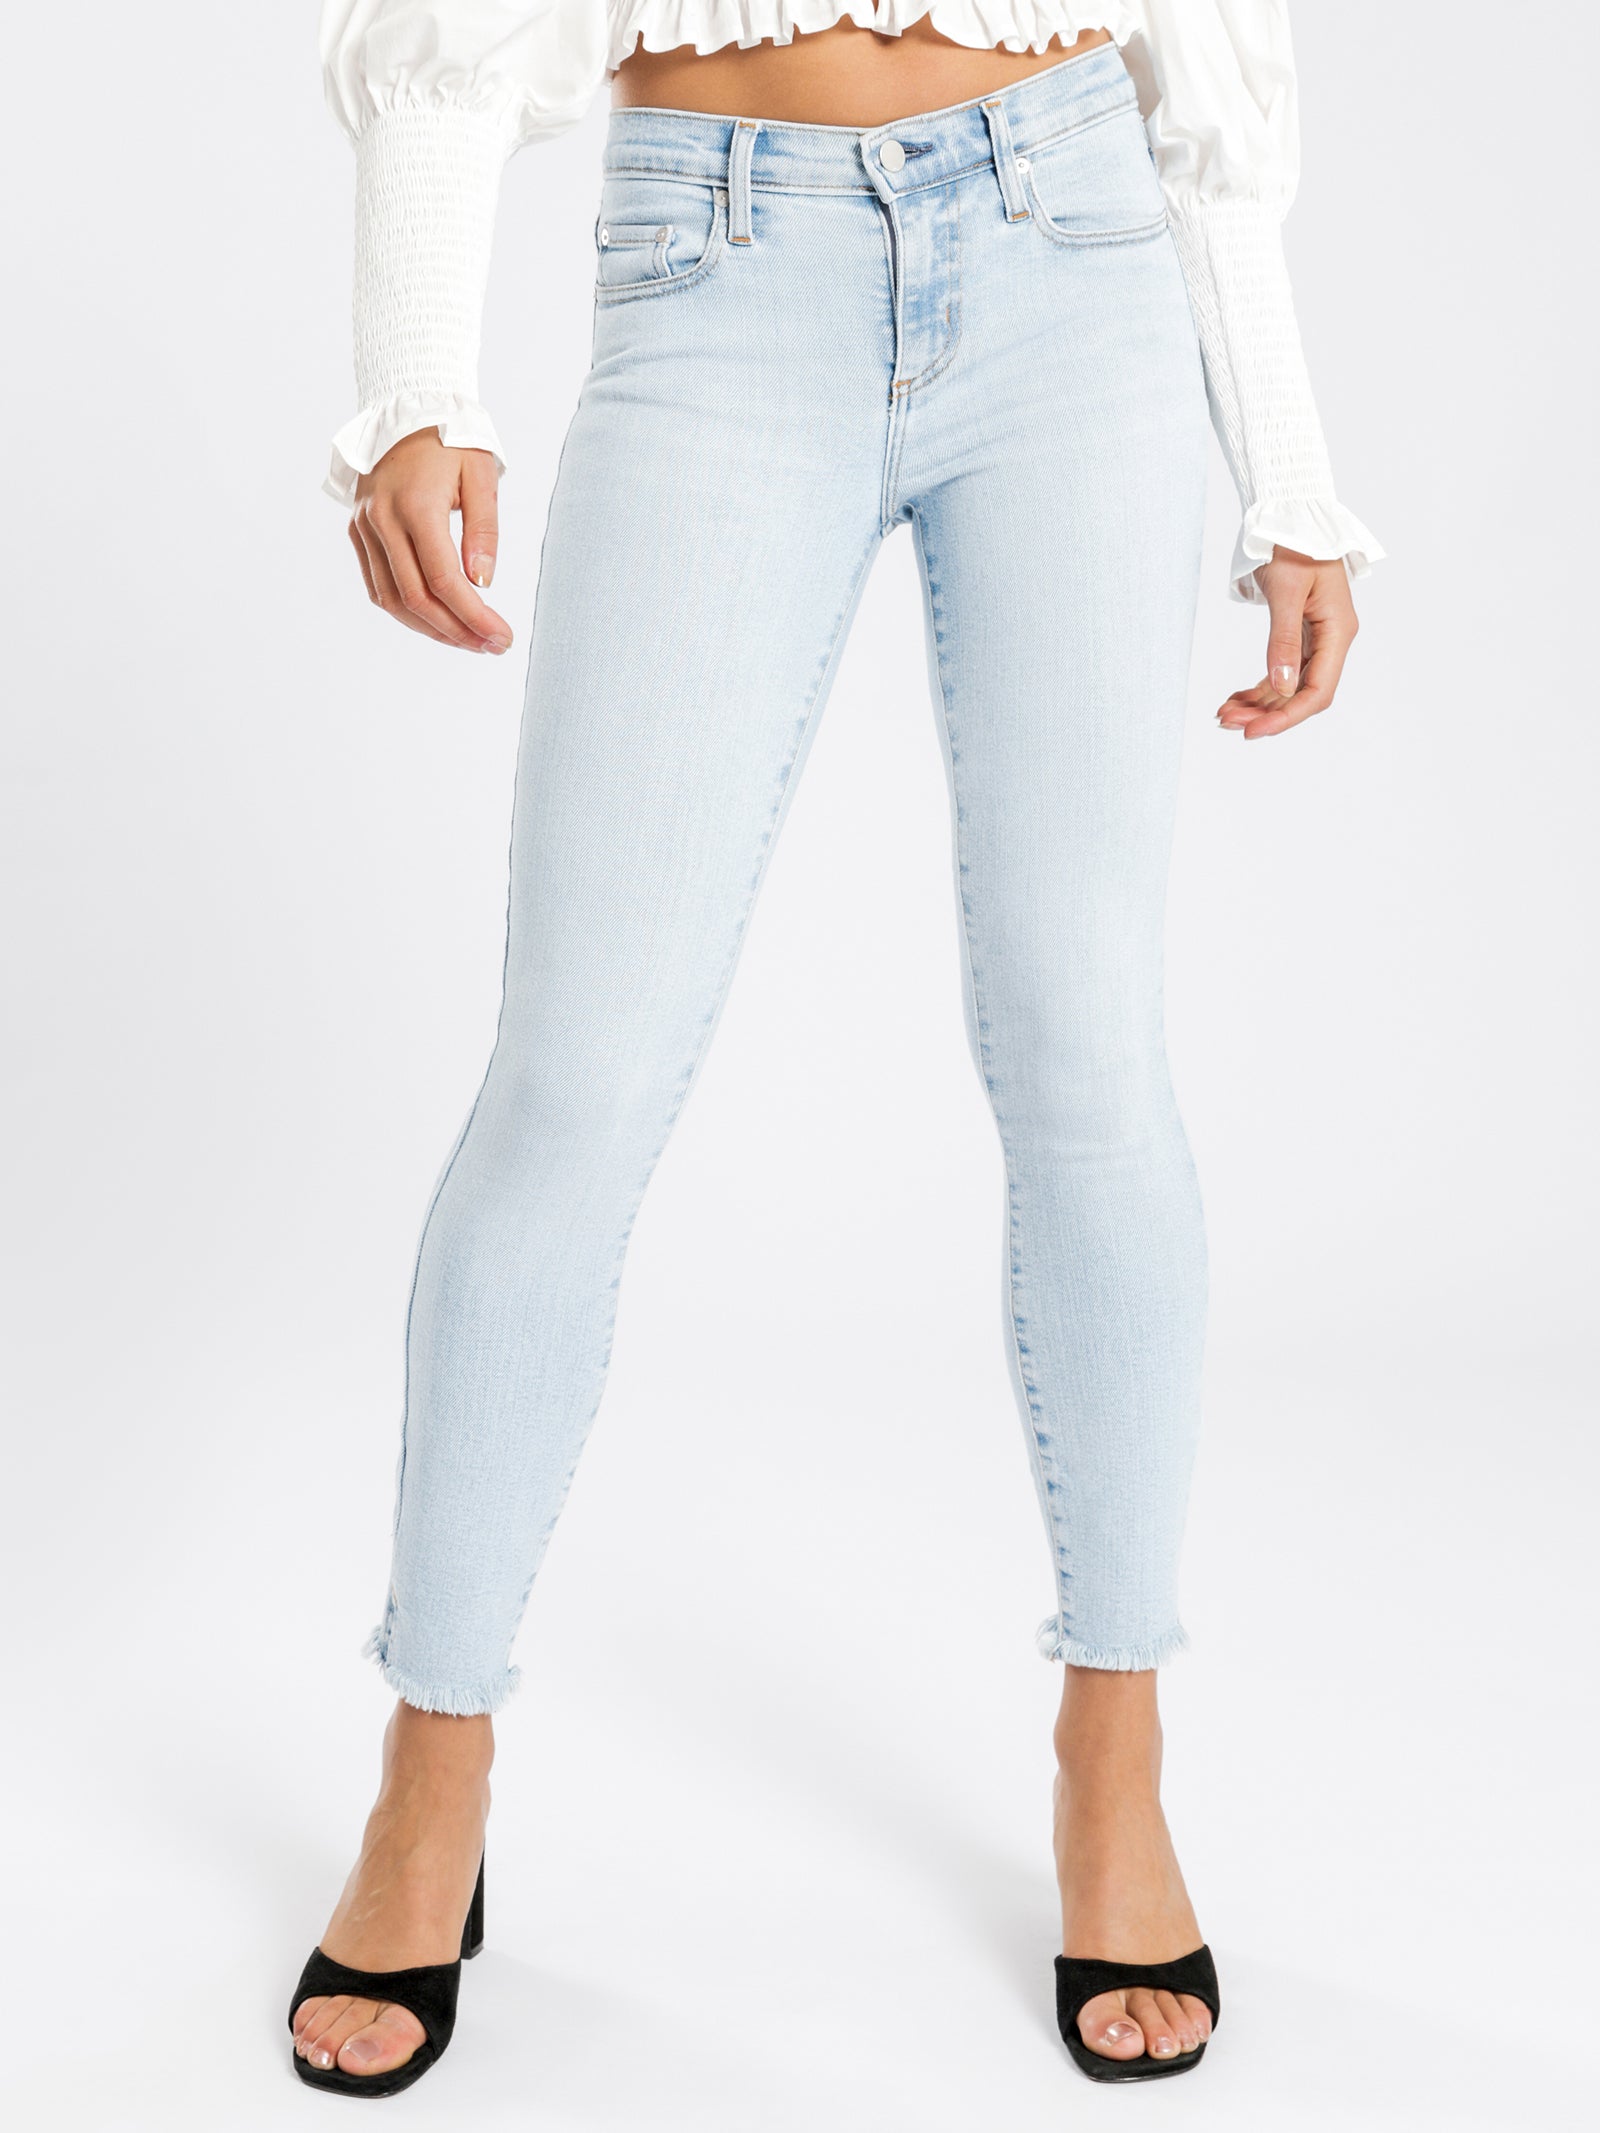 Geo Mid-Rise Skinny Ankle Jeans in Light Authentic Blue Denim - Glue Store